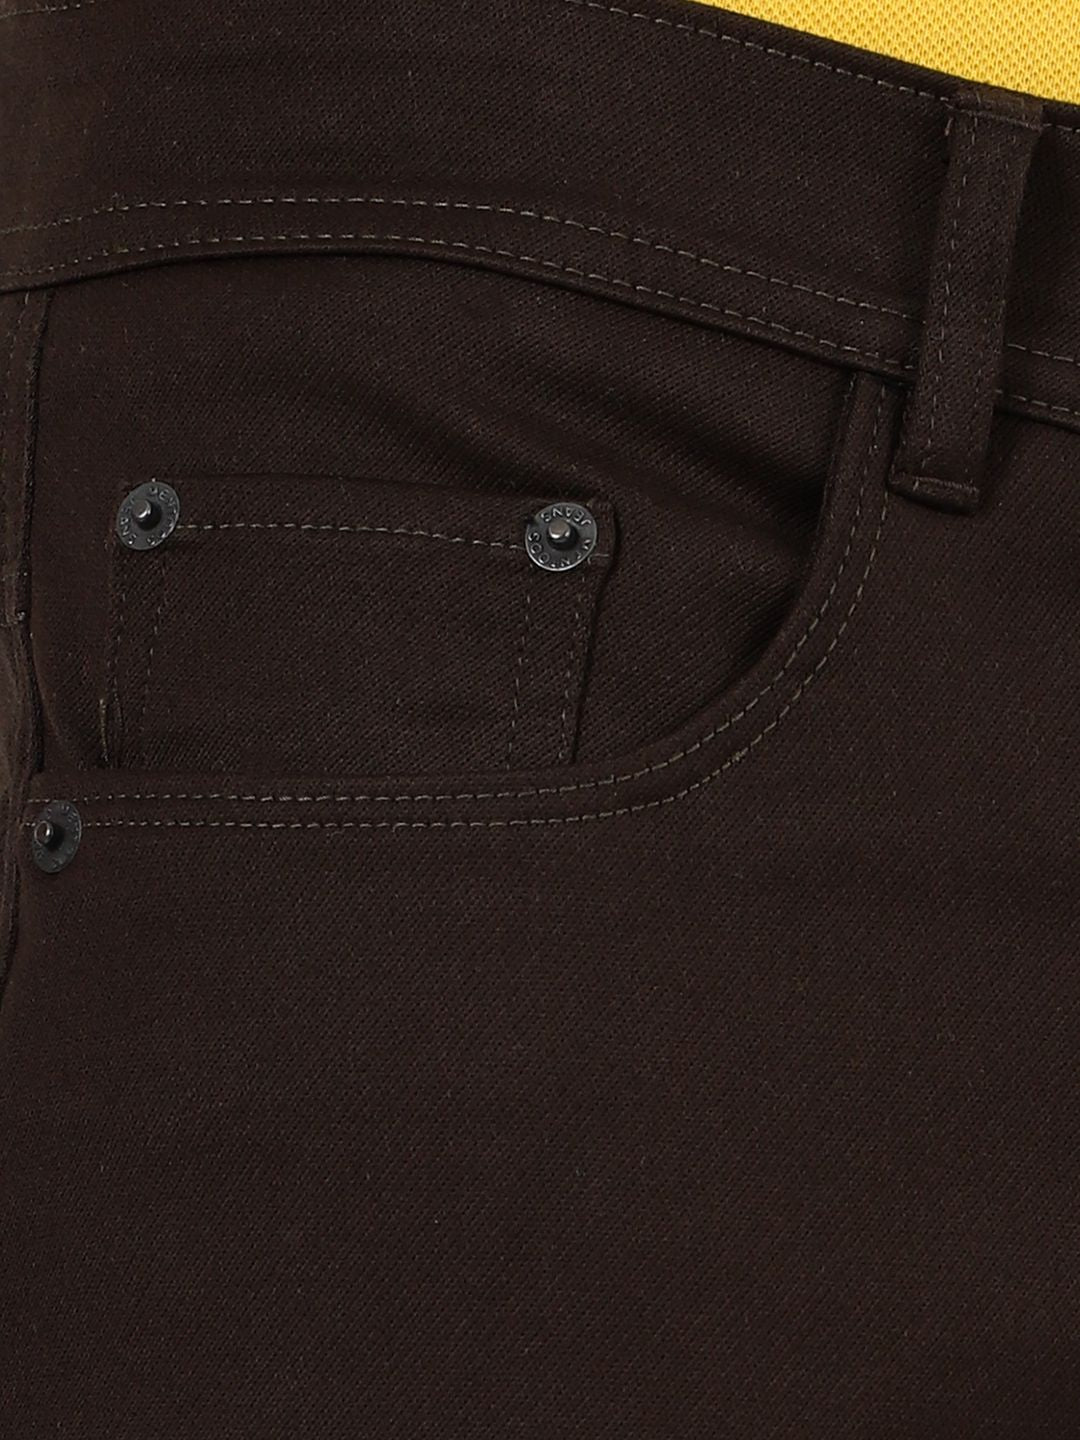 Slim fit flat front trouser_Brown